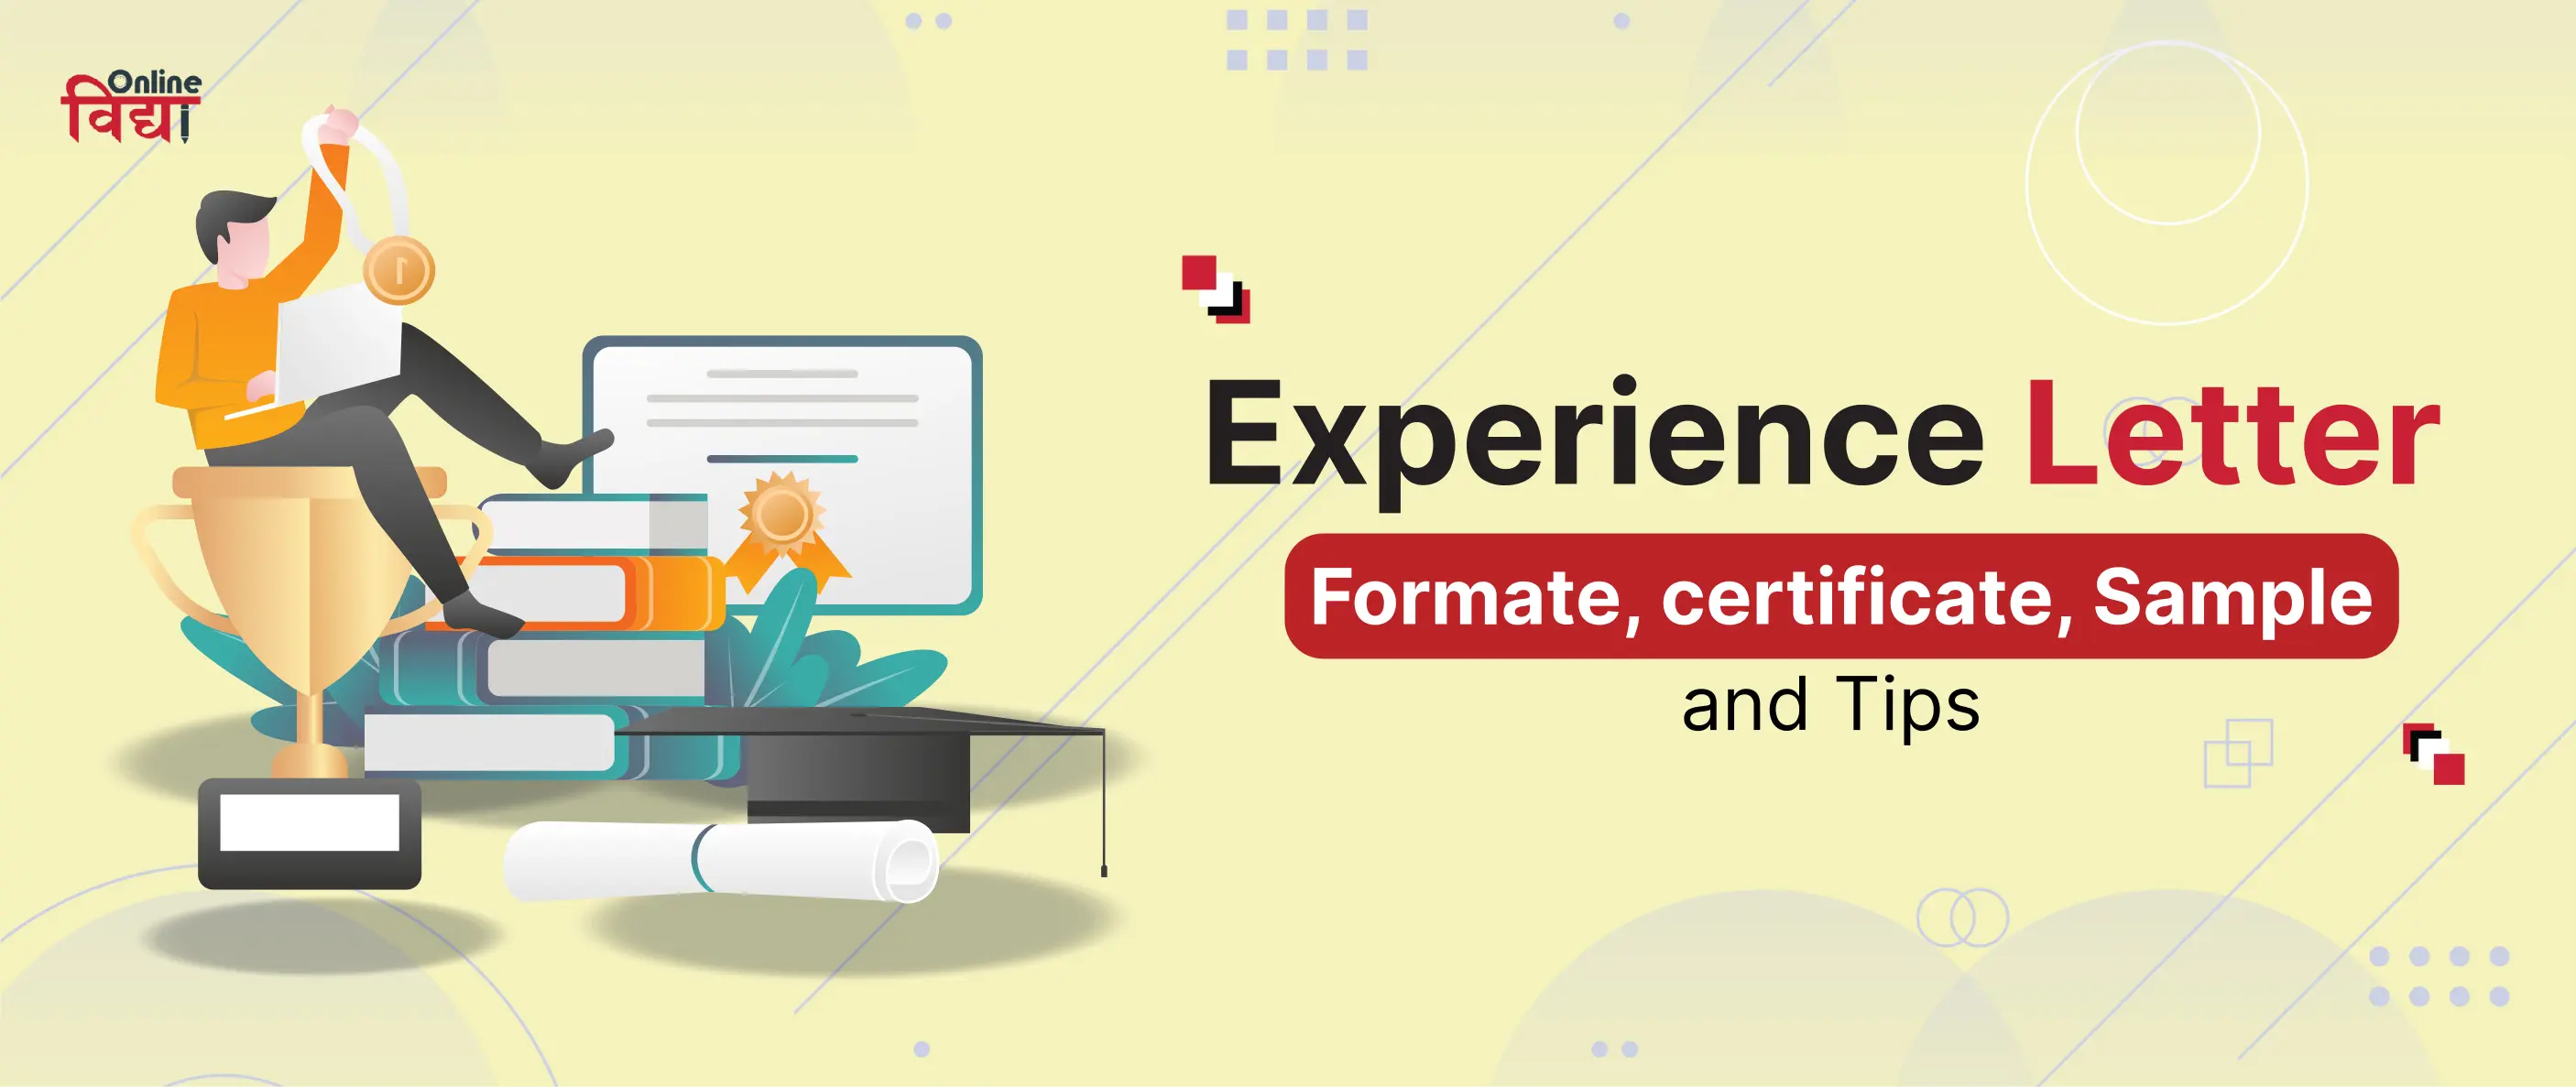 Experience Letter: Format, Certificate, Sample and Tips